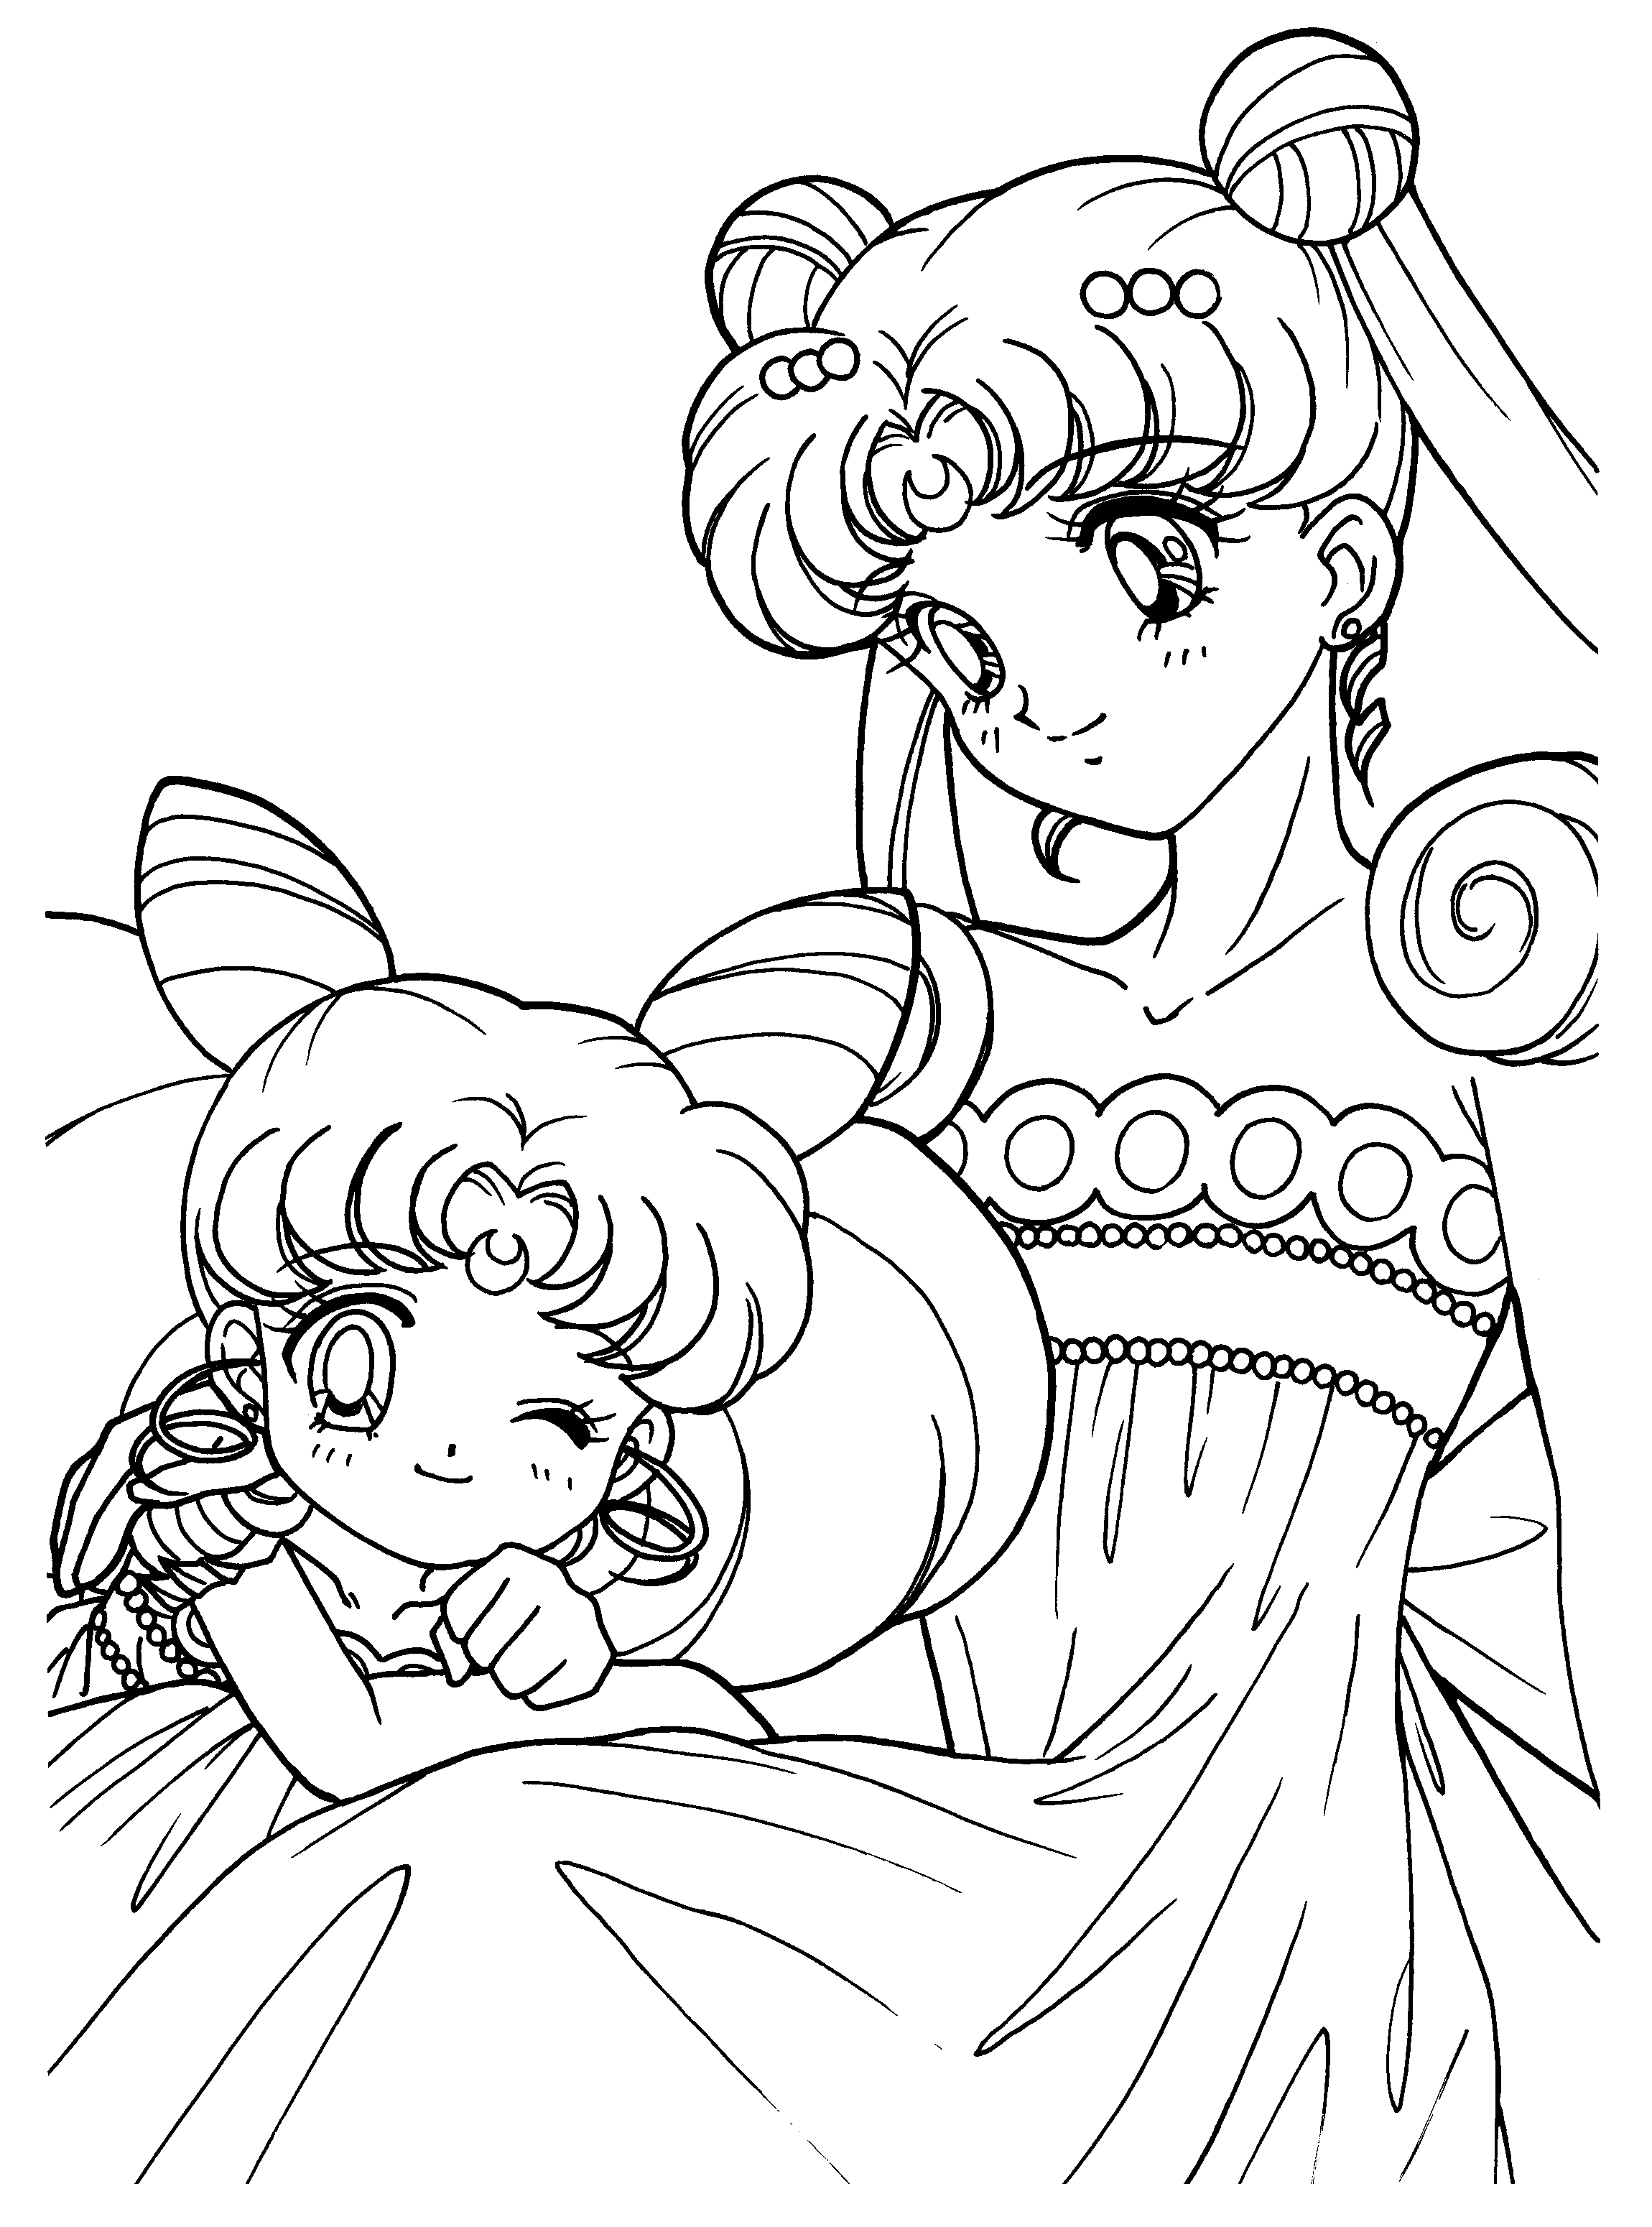 Coloring Page - Sailormoon coloring pages 111